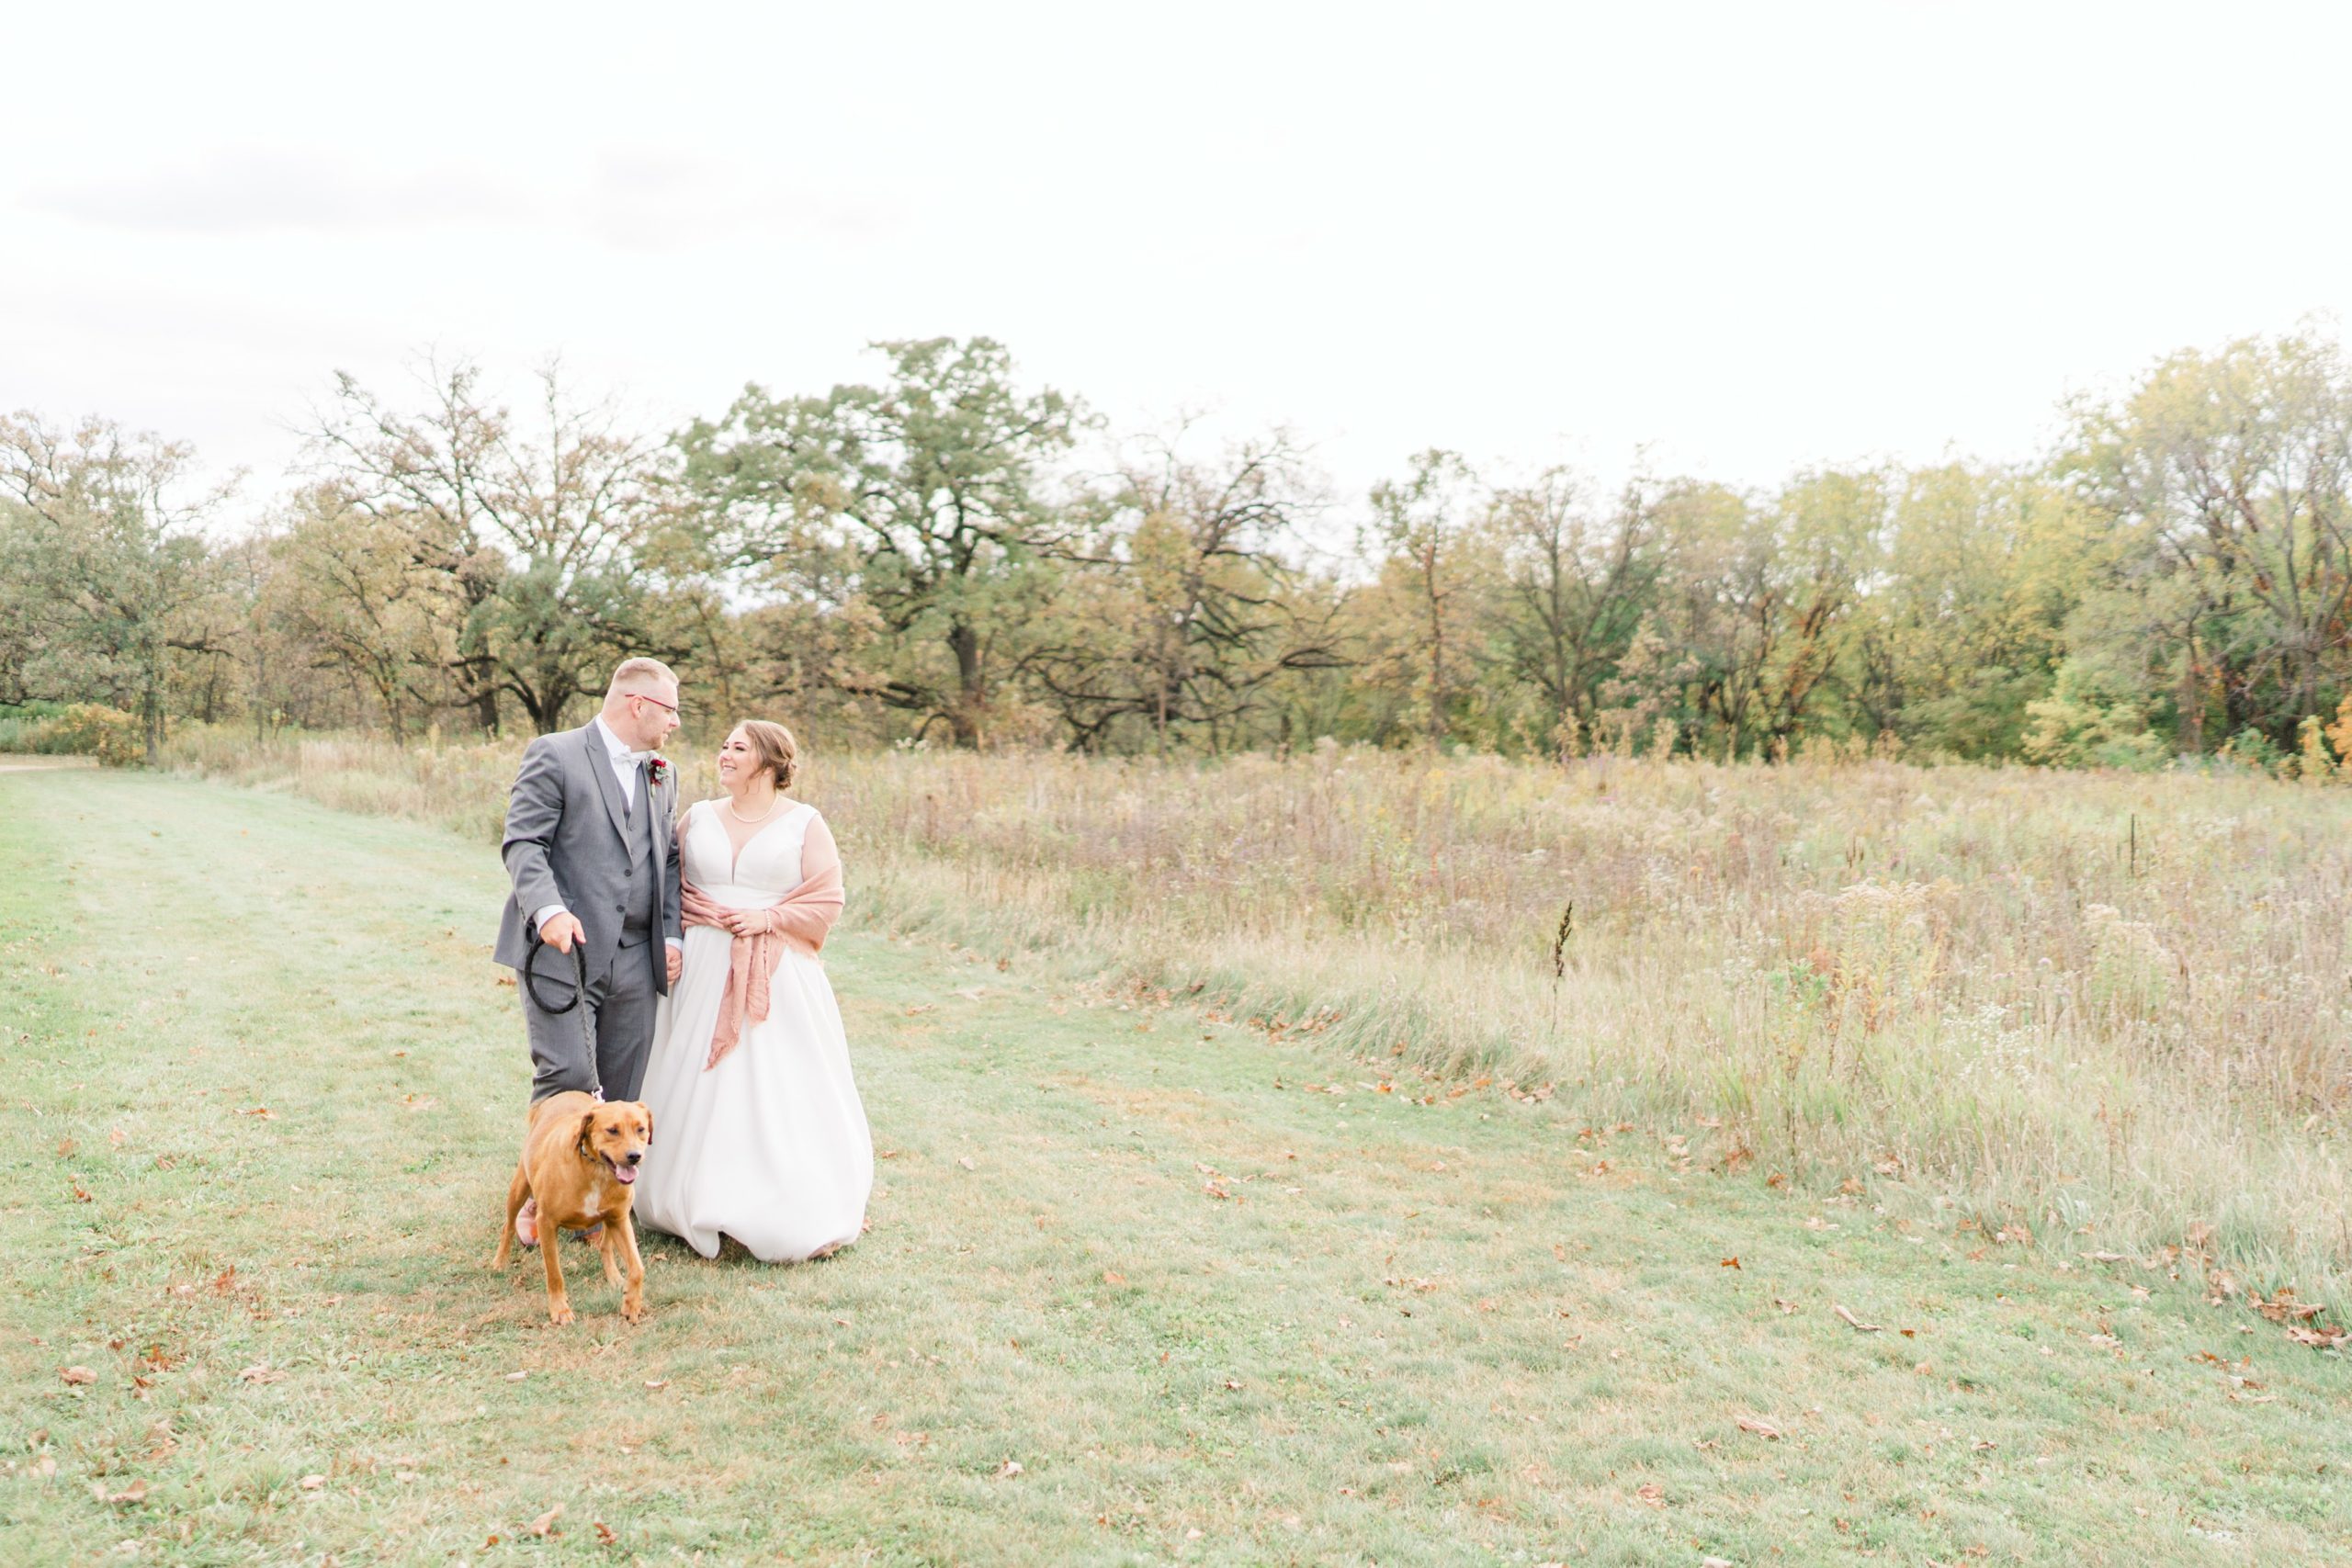 Bride and groom with dog in field Northfield Wedding Portraits